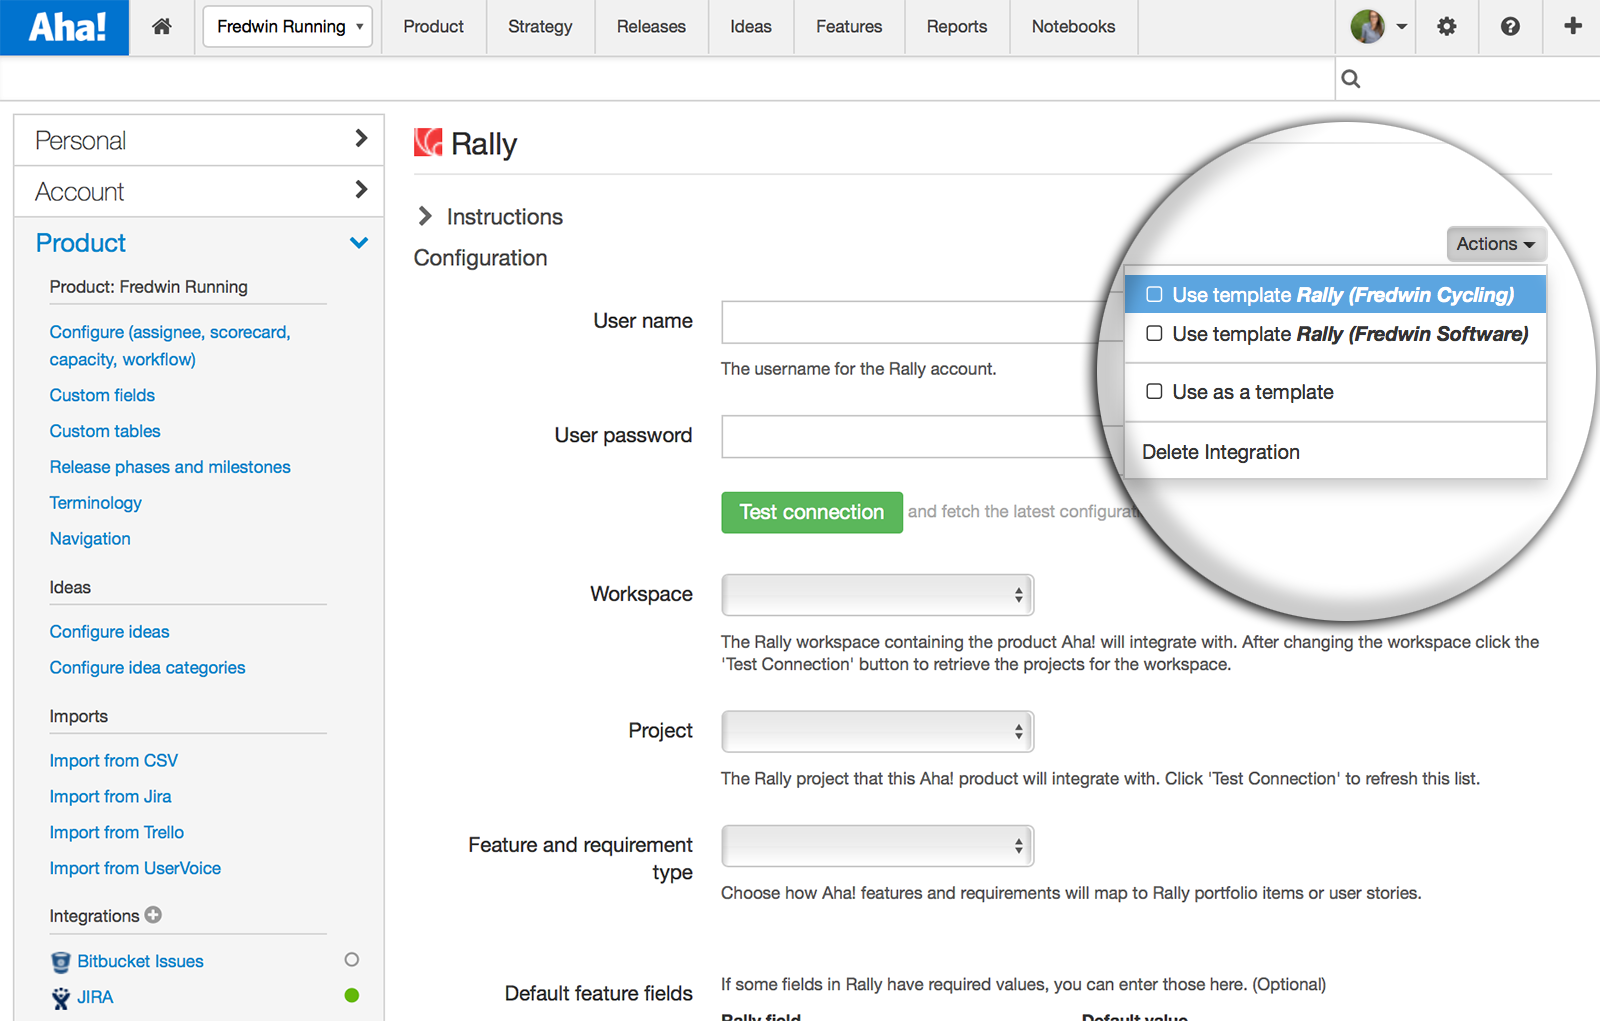 Blog - Aha! + Rally Integration Templates Just Launched - inline image